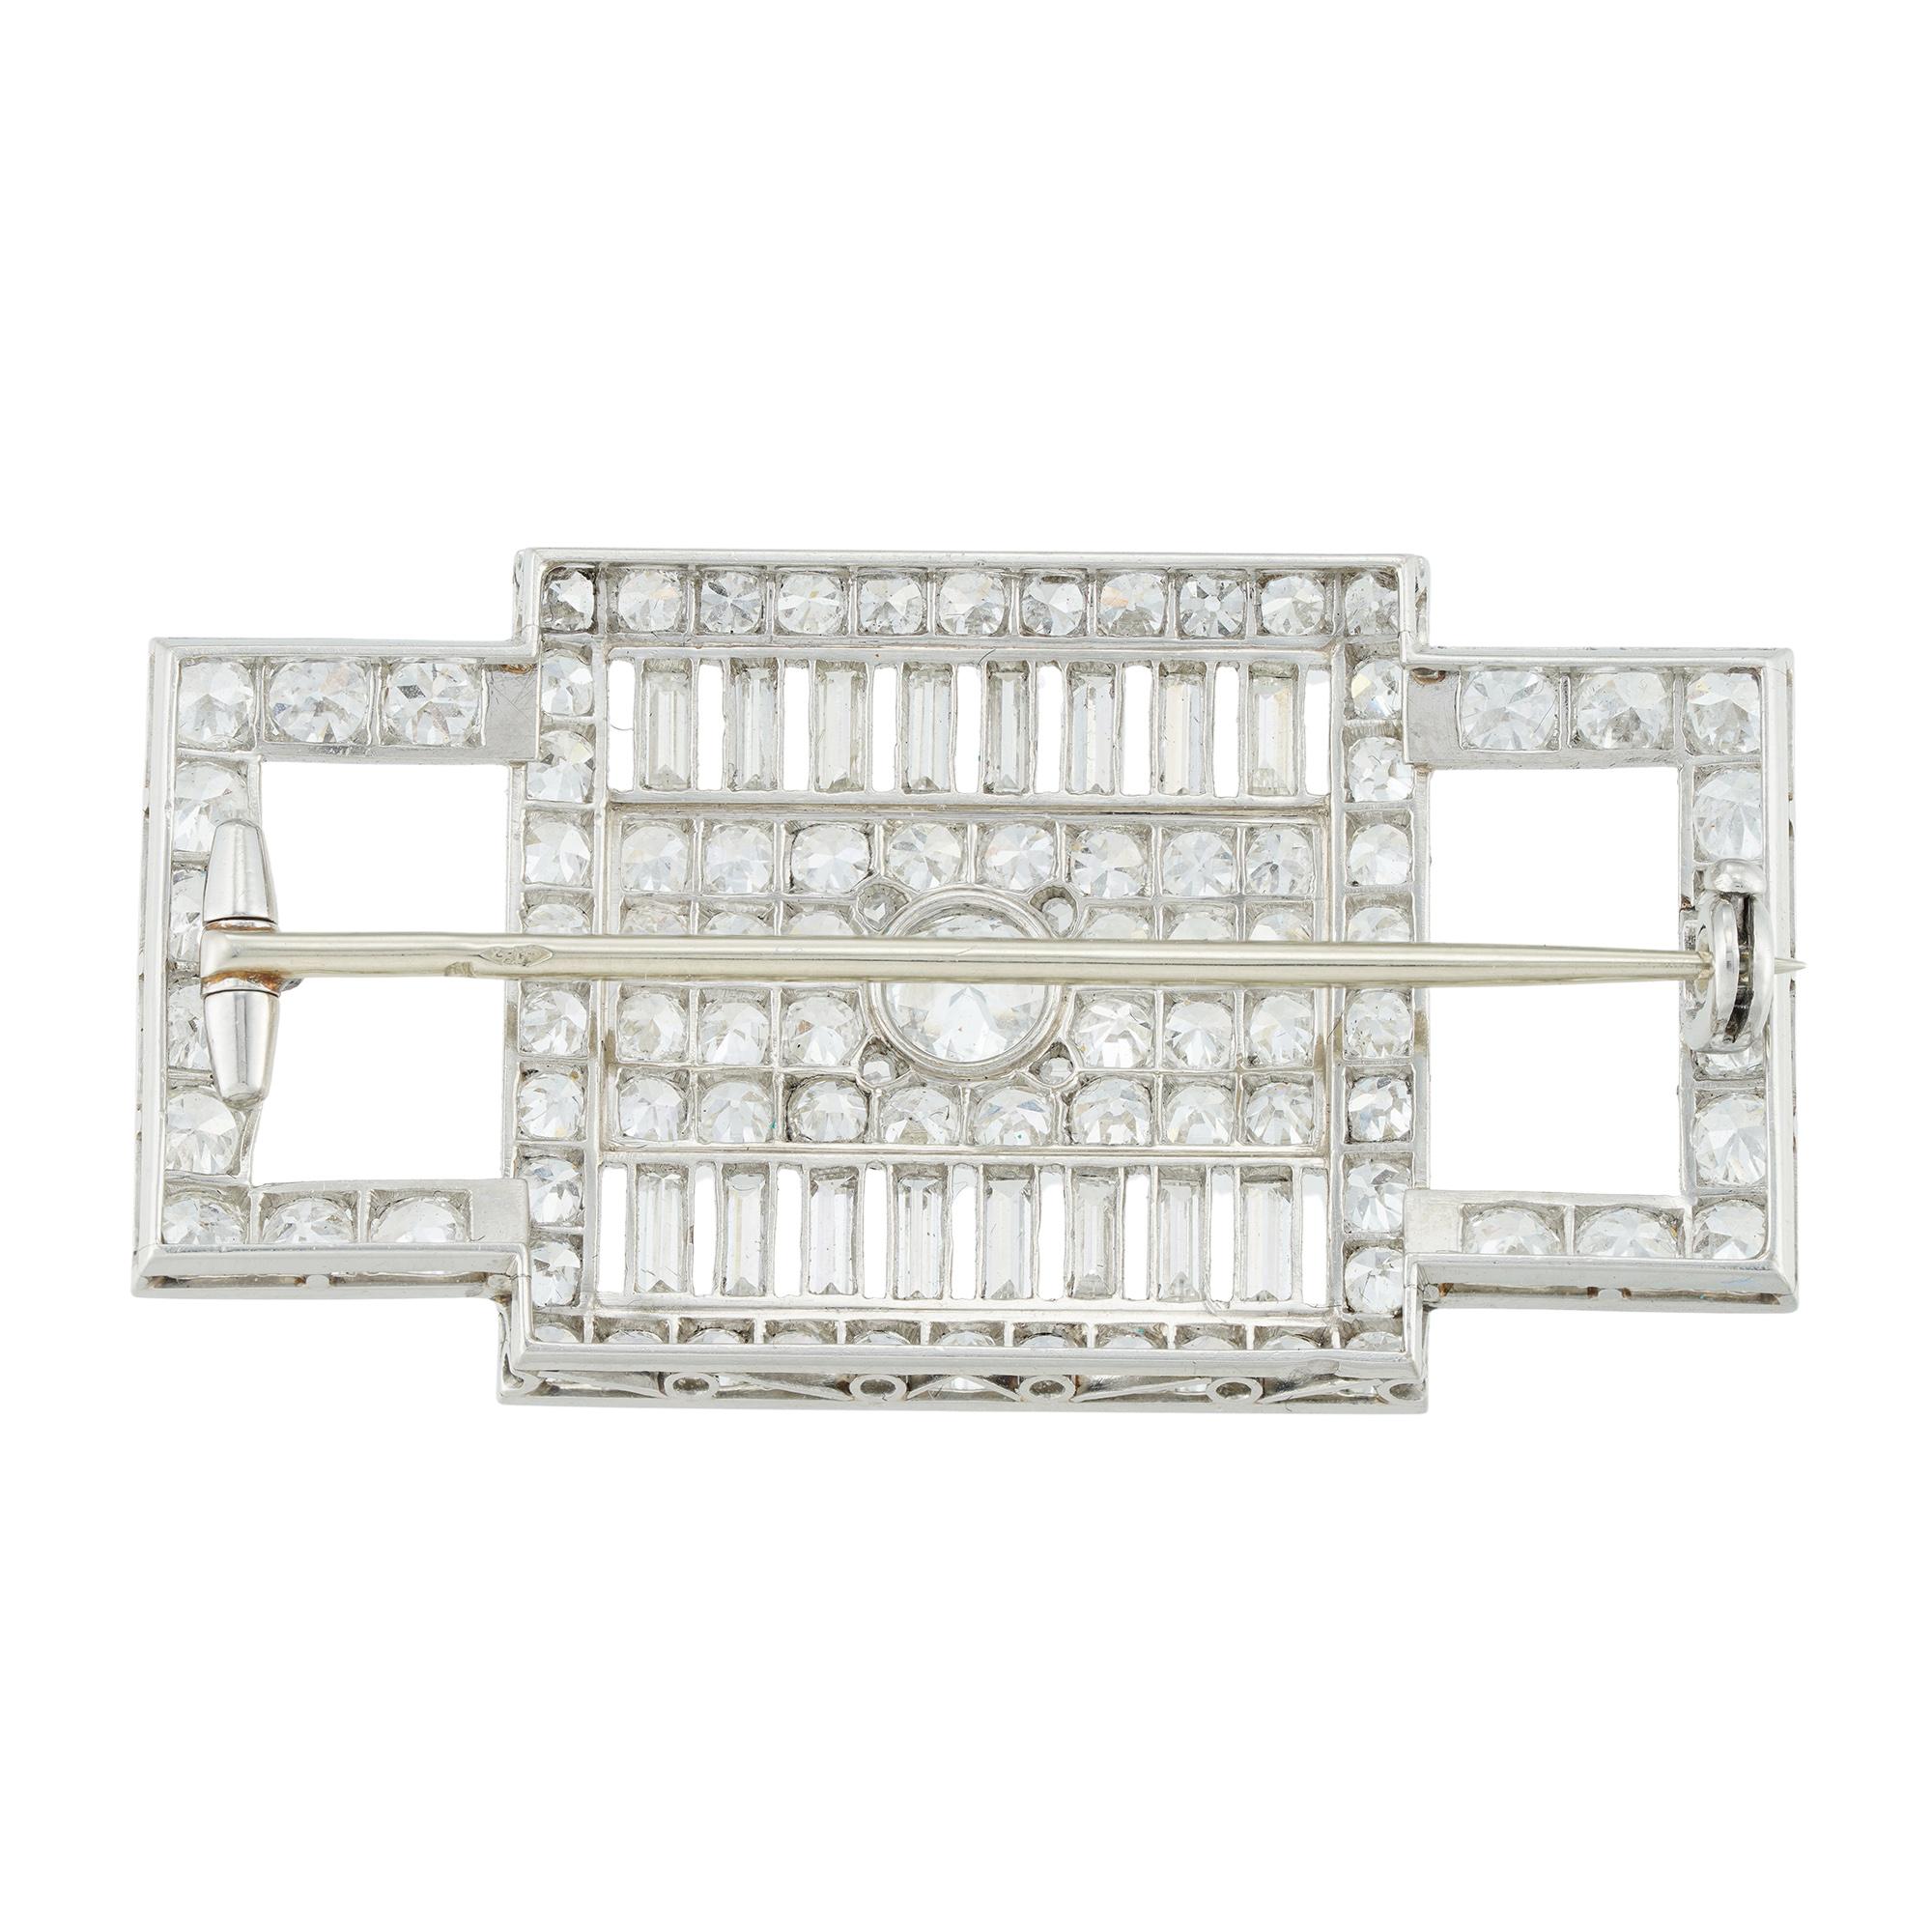 A French Art Deco diamond set brooch by Lambert Frères, of rectangular shape with an openwork pattern, set with central round brilliant-cut diamond estimated to weigh 0.40 carats, to a round brilliant-cut diamond-set panel, with baguette-cut